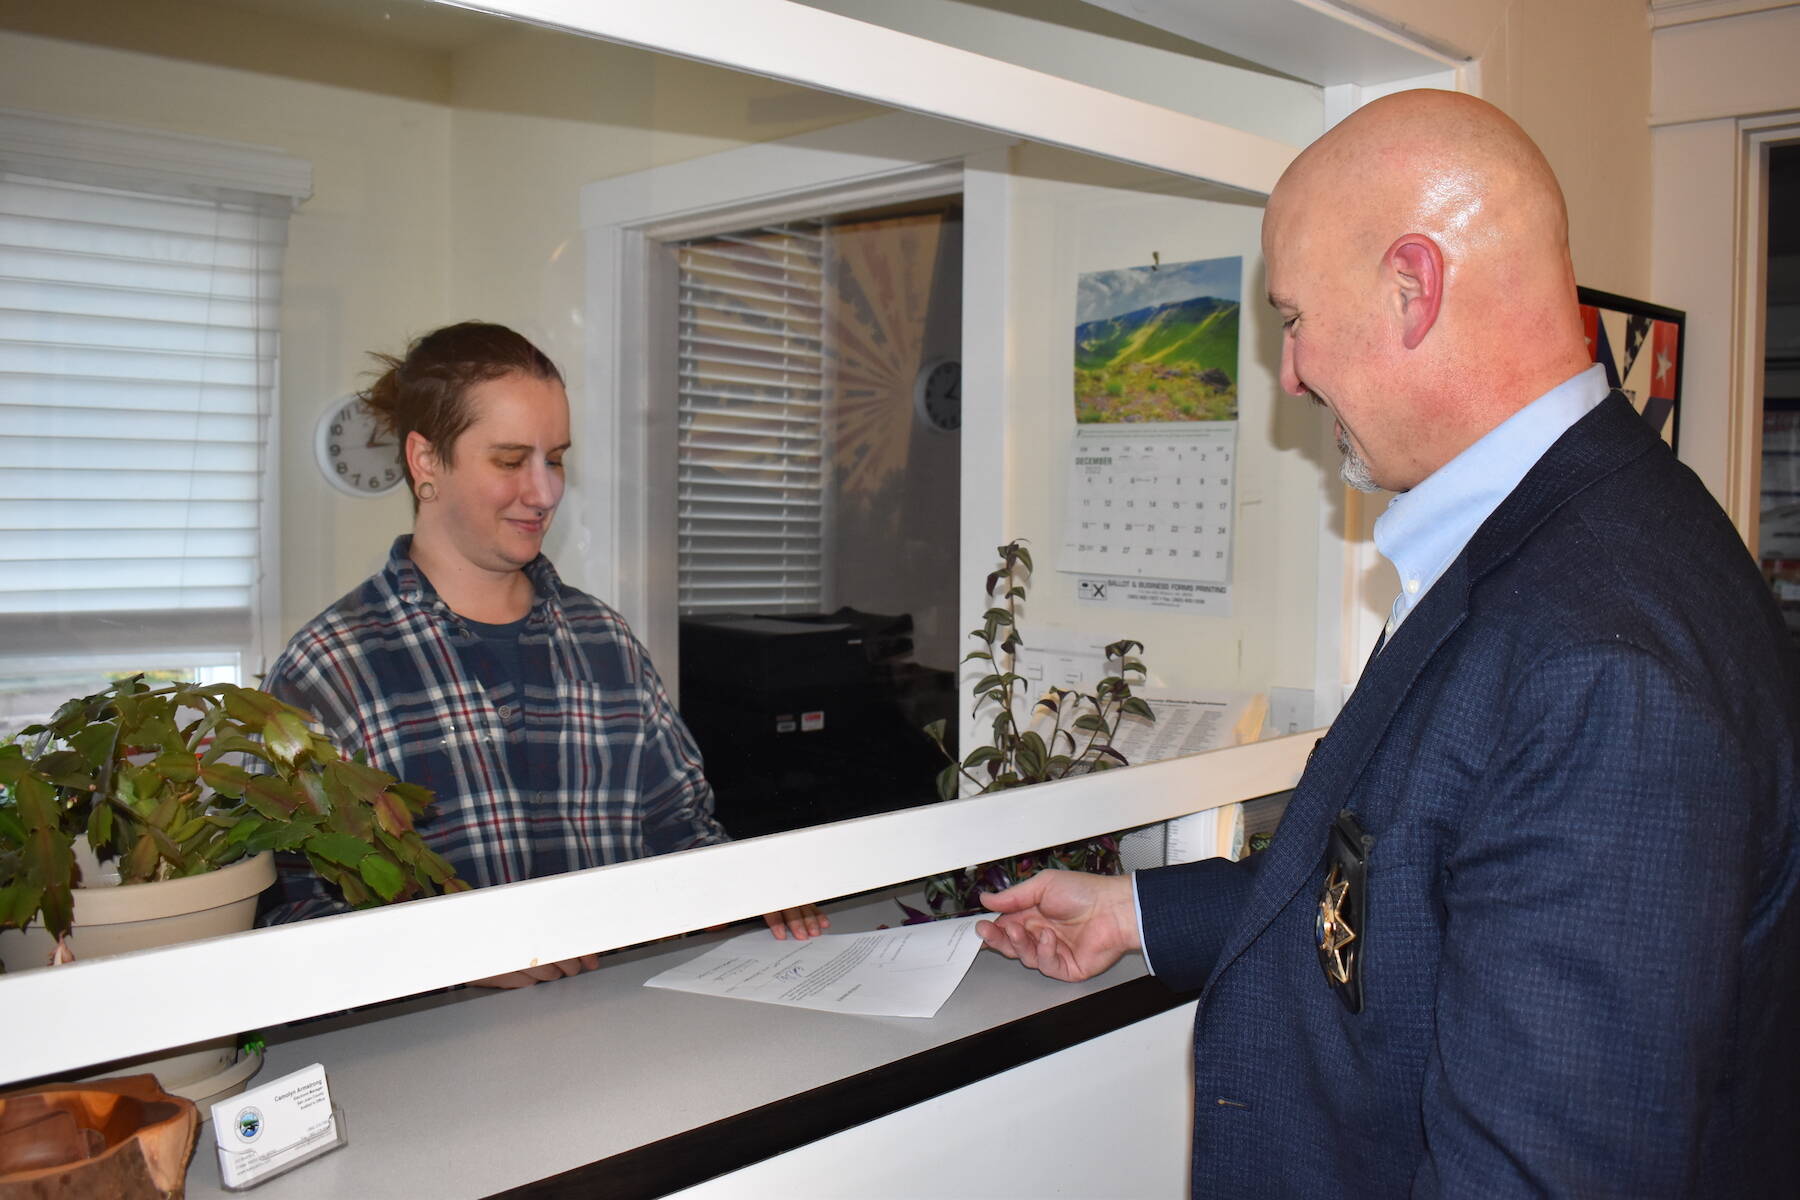 Kelley Balcomb-Bartok\ Staff photo
Newly Elected Sheriff Eric Peter turns in his official election paperwork following his swearing-in ceremony Dec. 30.